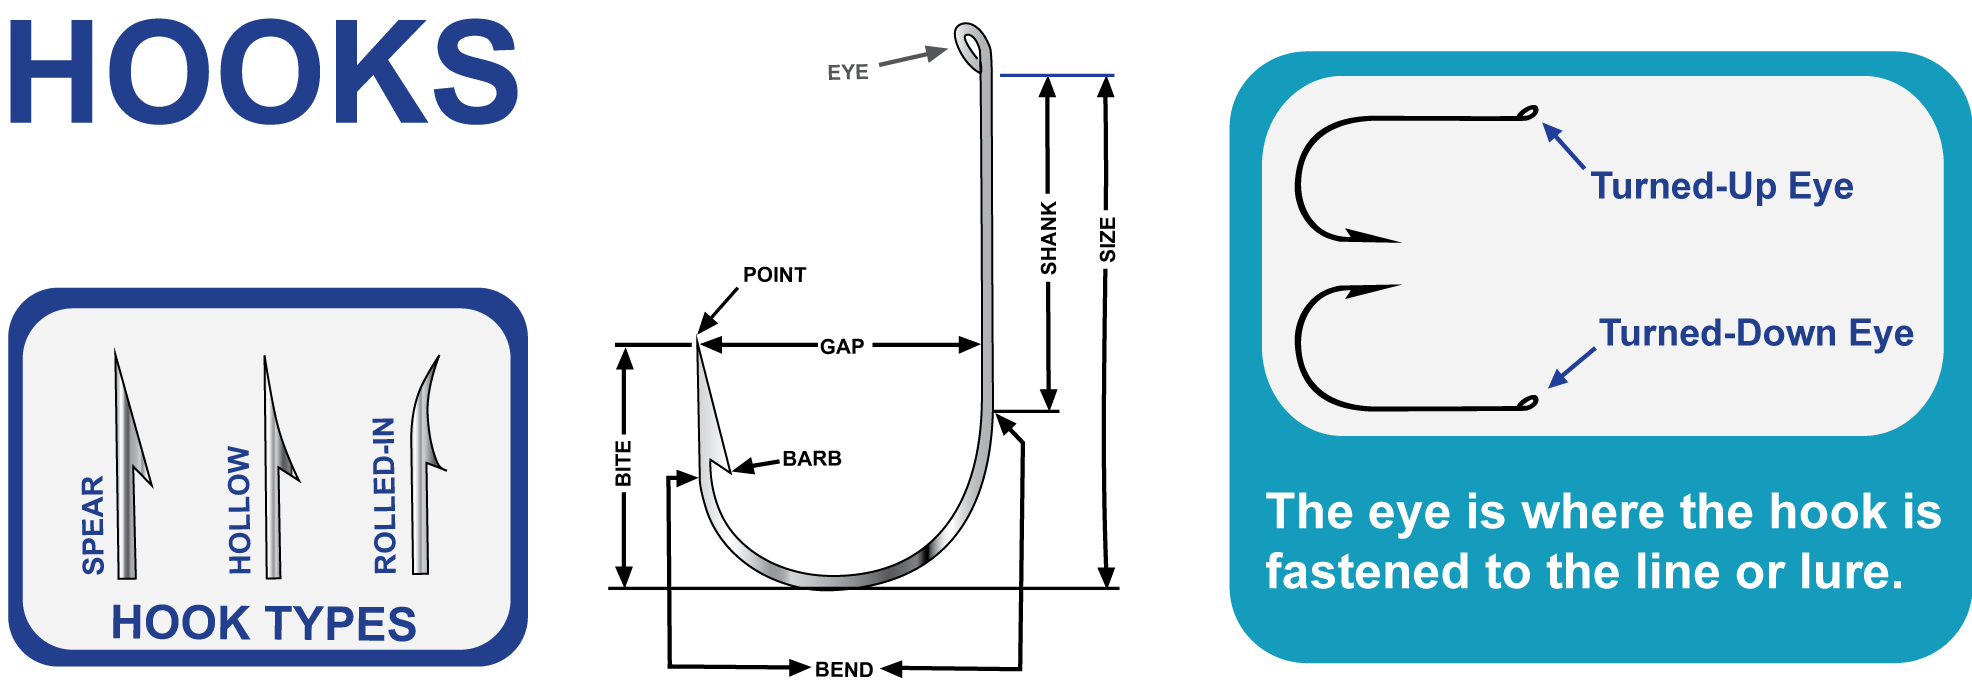 How to pick FISHING HOOKS - types, sizes, brands, setups. How to catch  fish. Fishing tips 